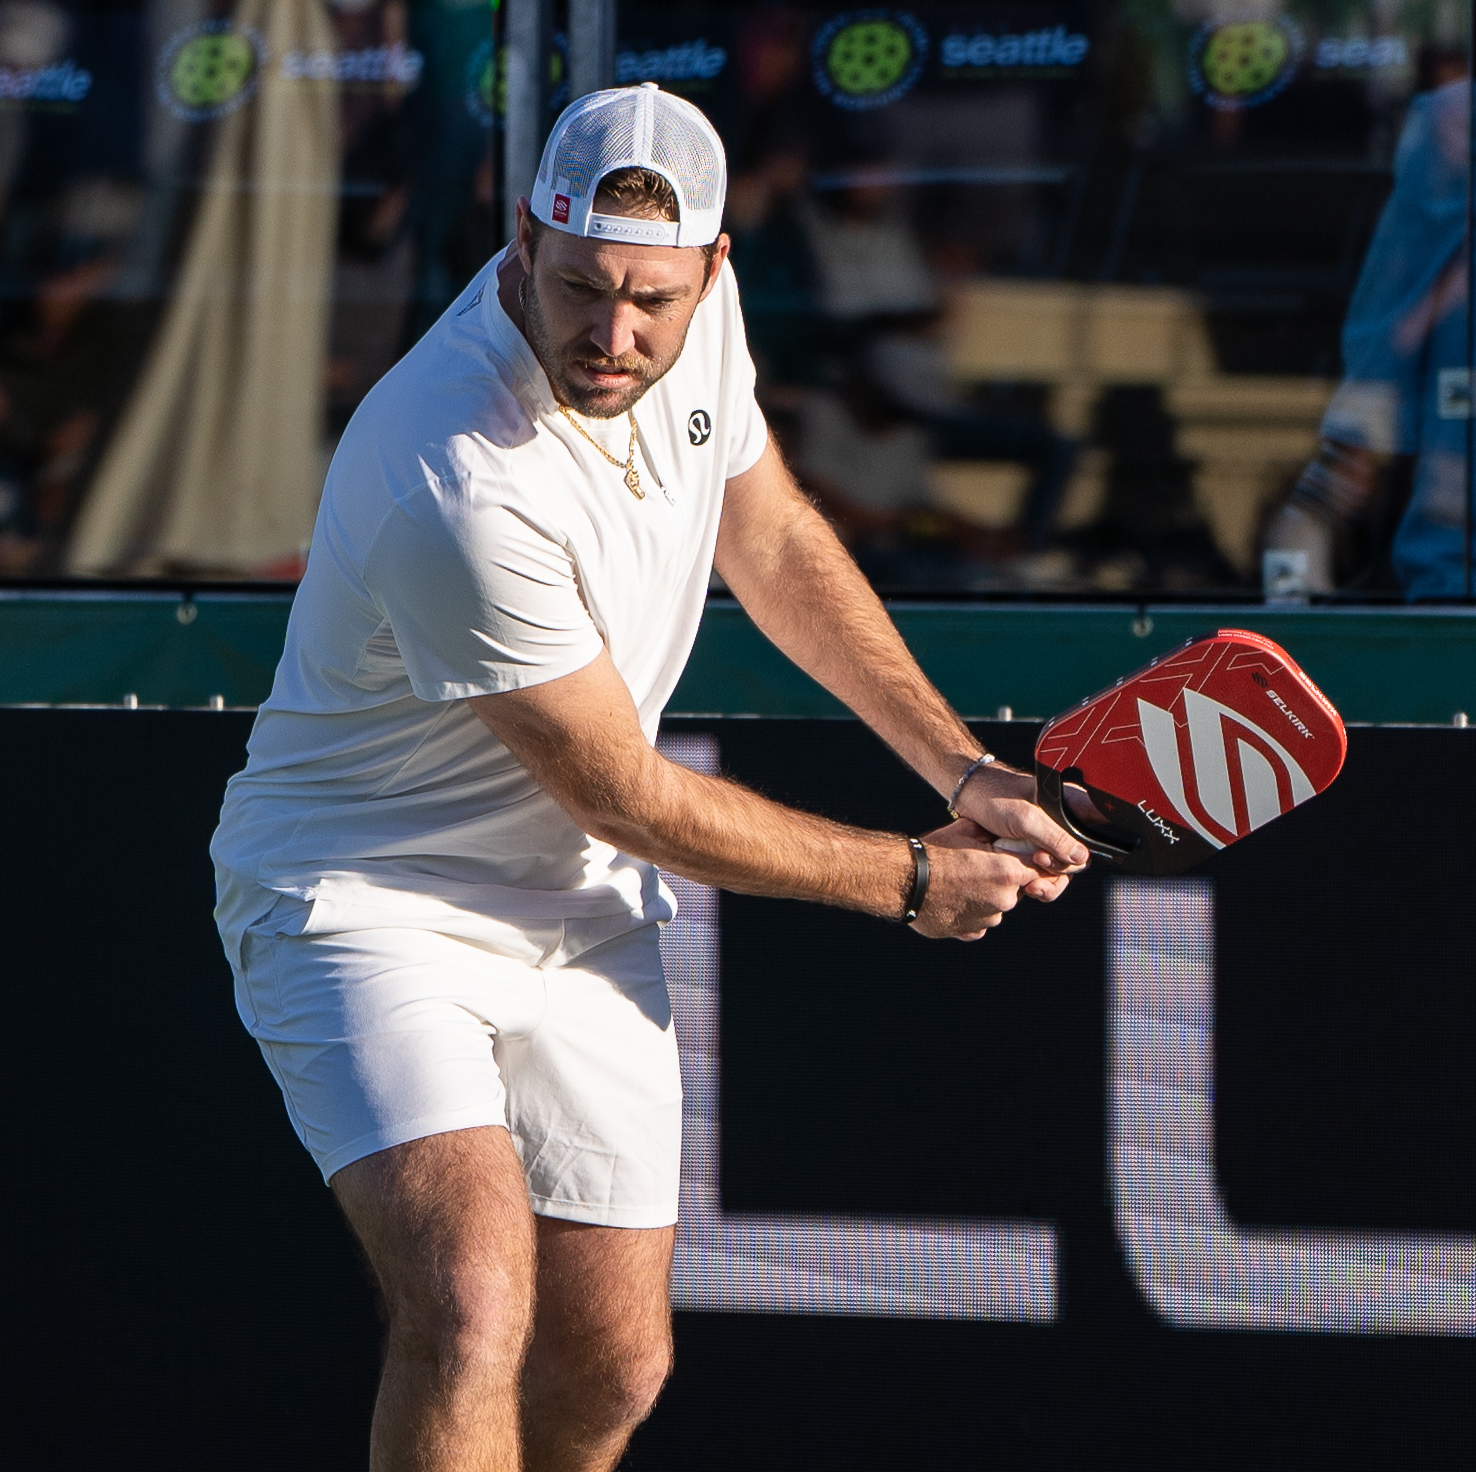 Action shot of Jack Sock with clickable dots to shop the products they are using and wearing.